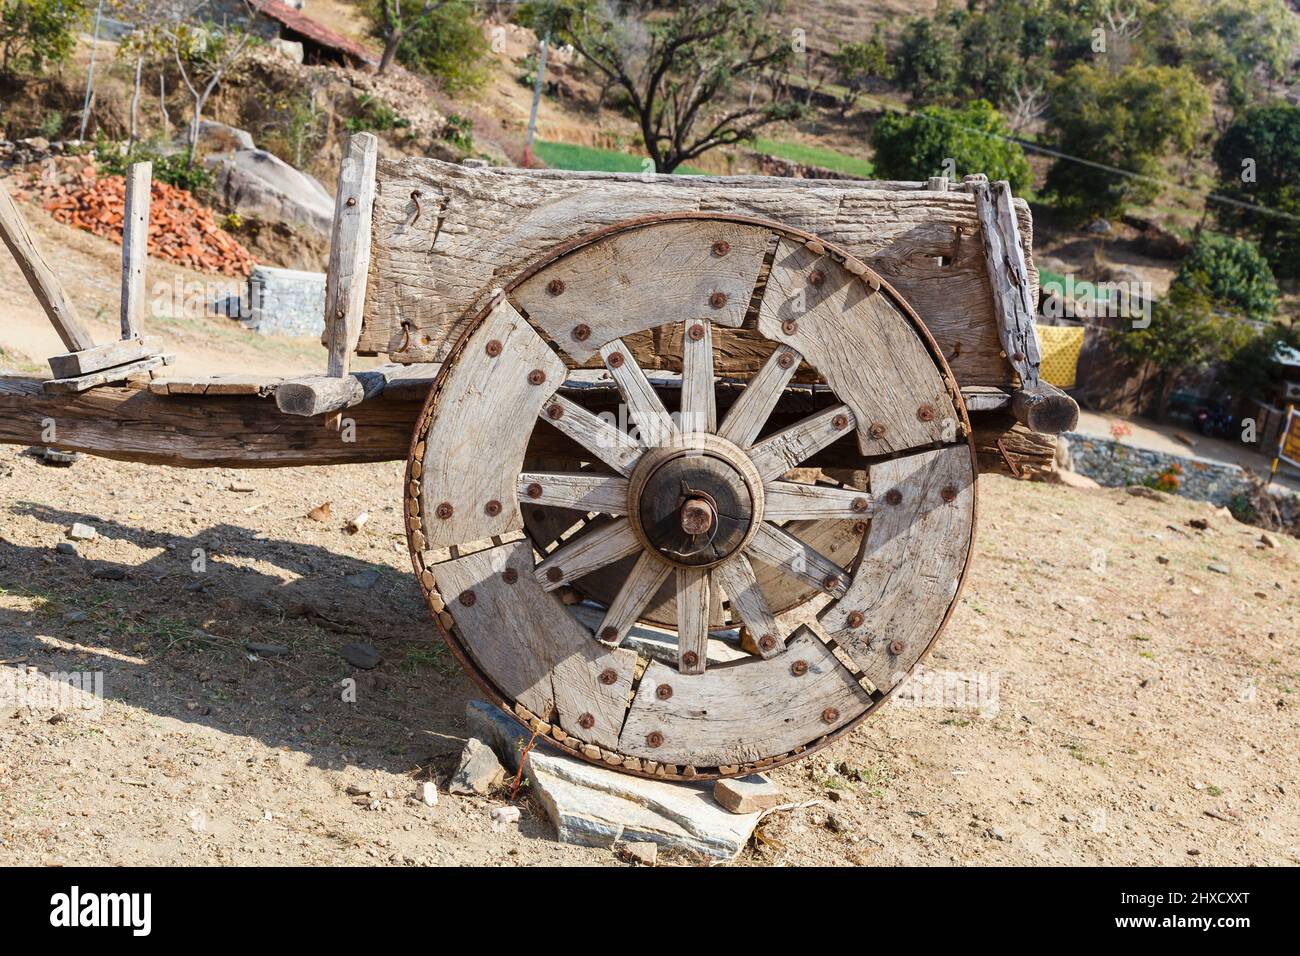 Traditional ox cart with wooden wheels in a farm near Kumbhalgarh Fort, Aravalli Hills, Rajsamand district near Udaipur, Rajasthan, western India Stock Photo